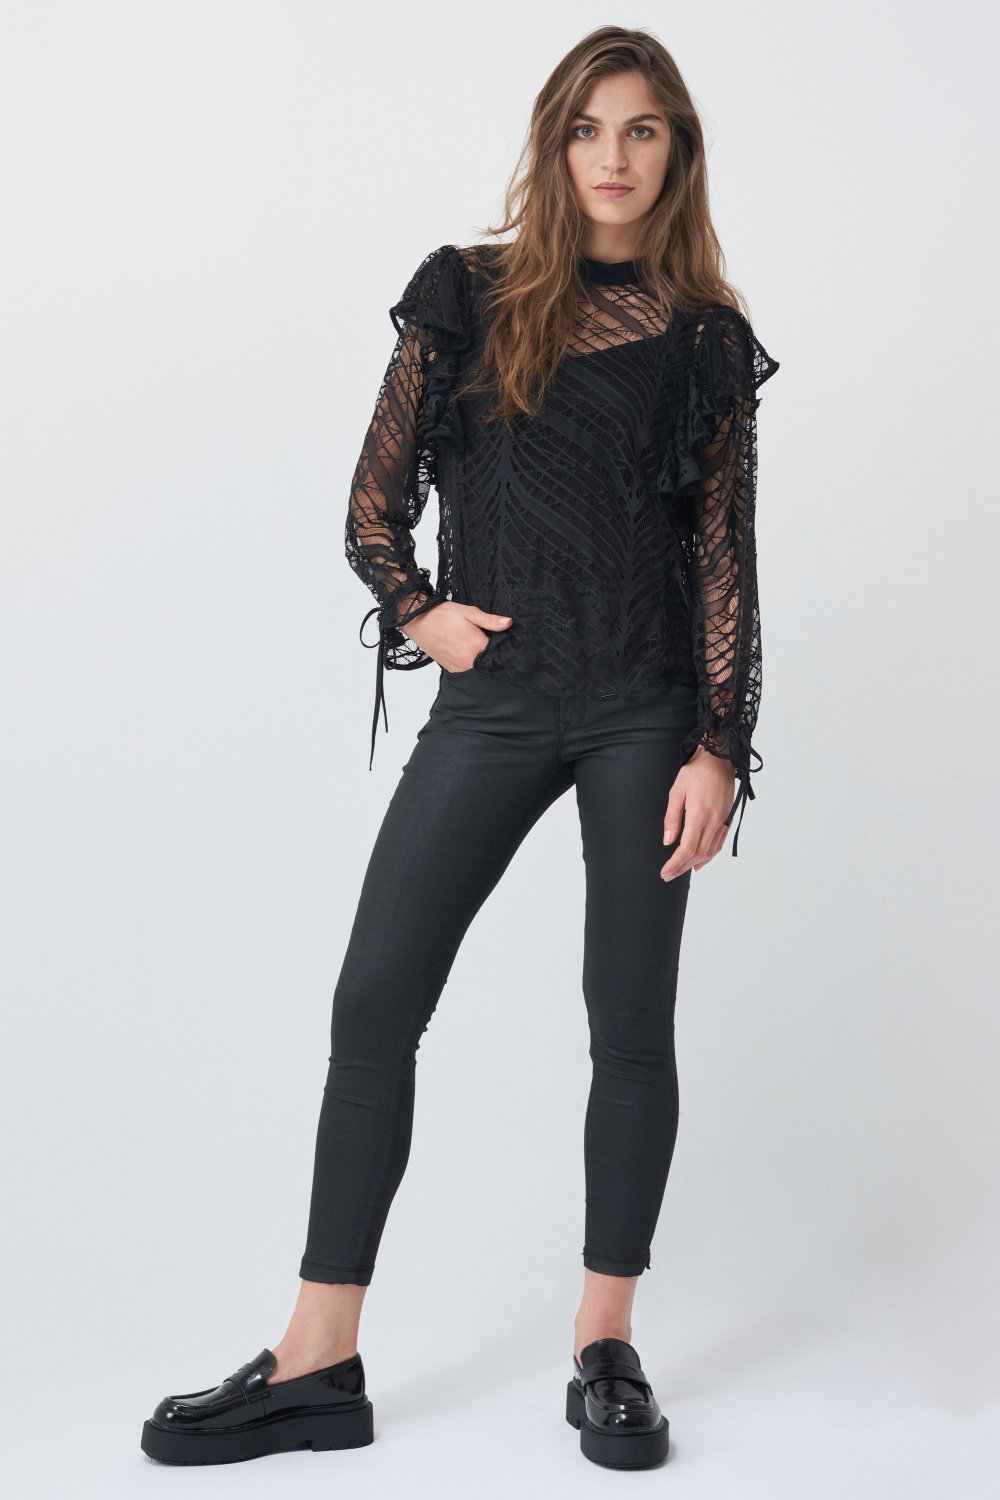 Lace tunic and top - Salsa